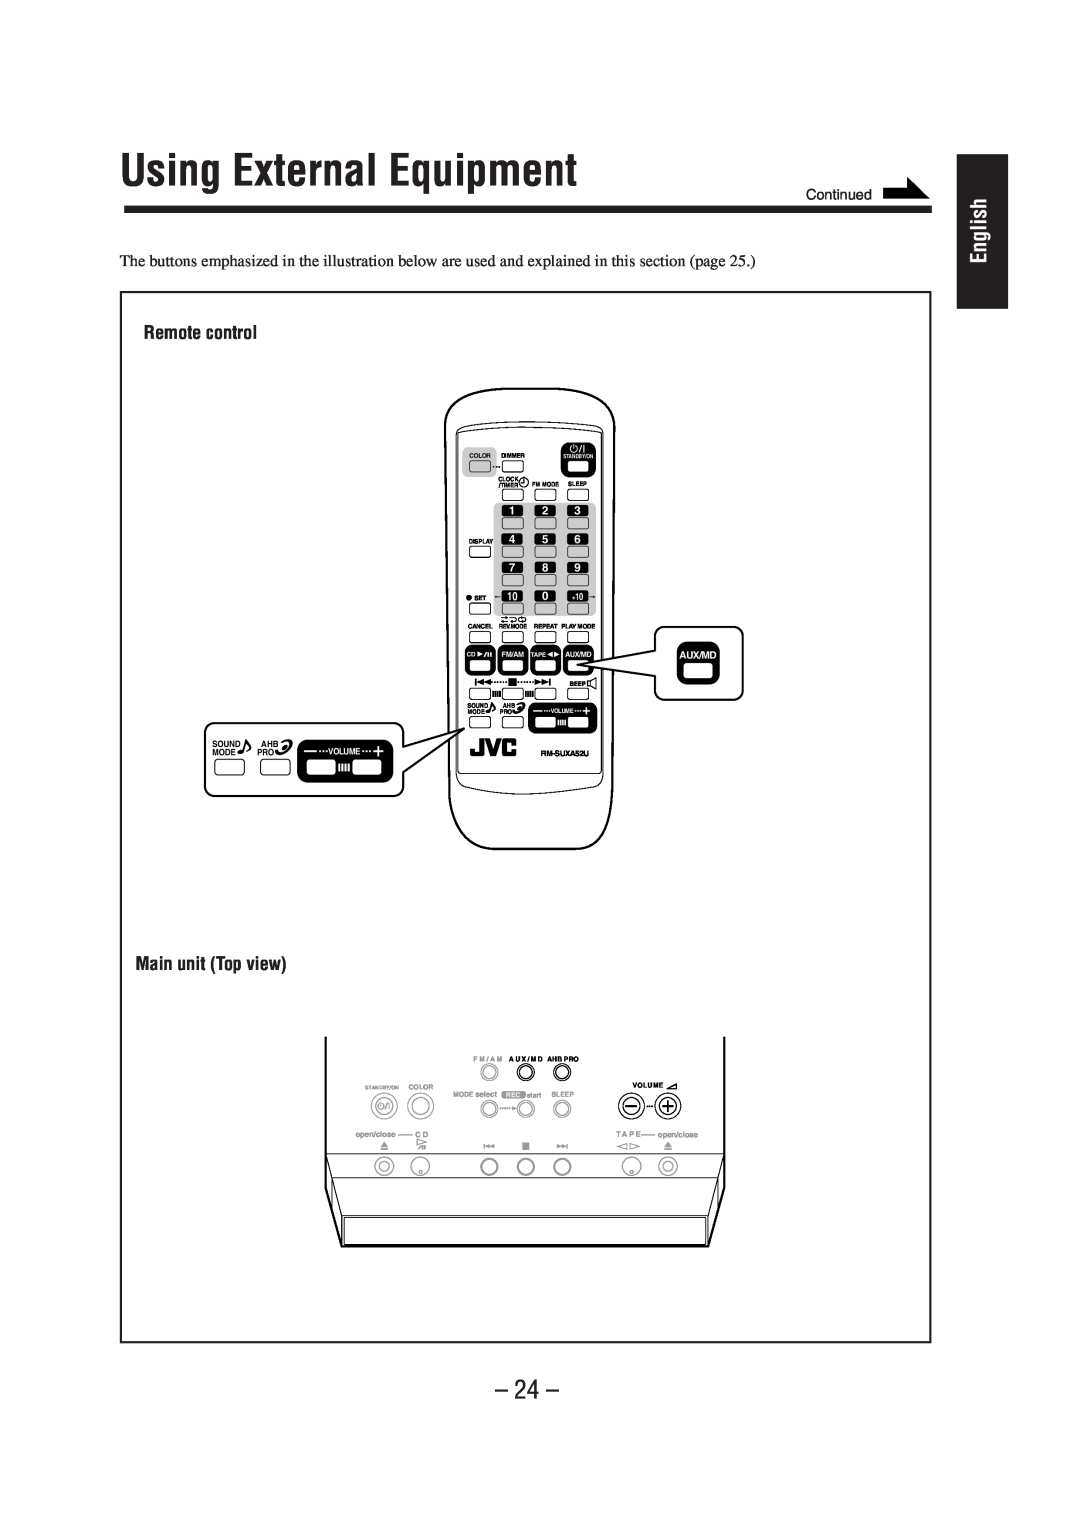 JVC UX-A52 manual Using External Equipment, English, Remote control, Main unit Top view, Continued 